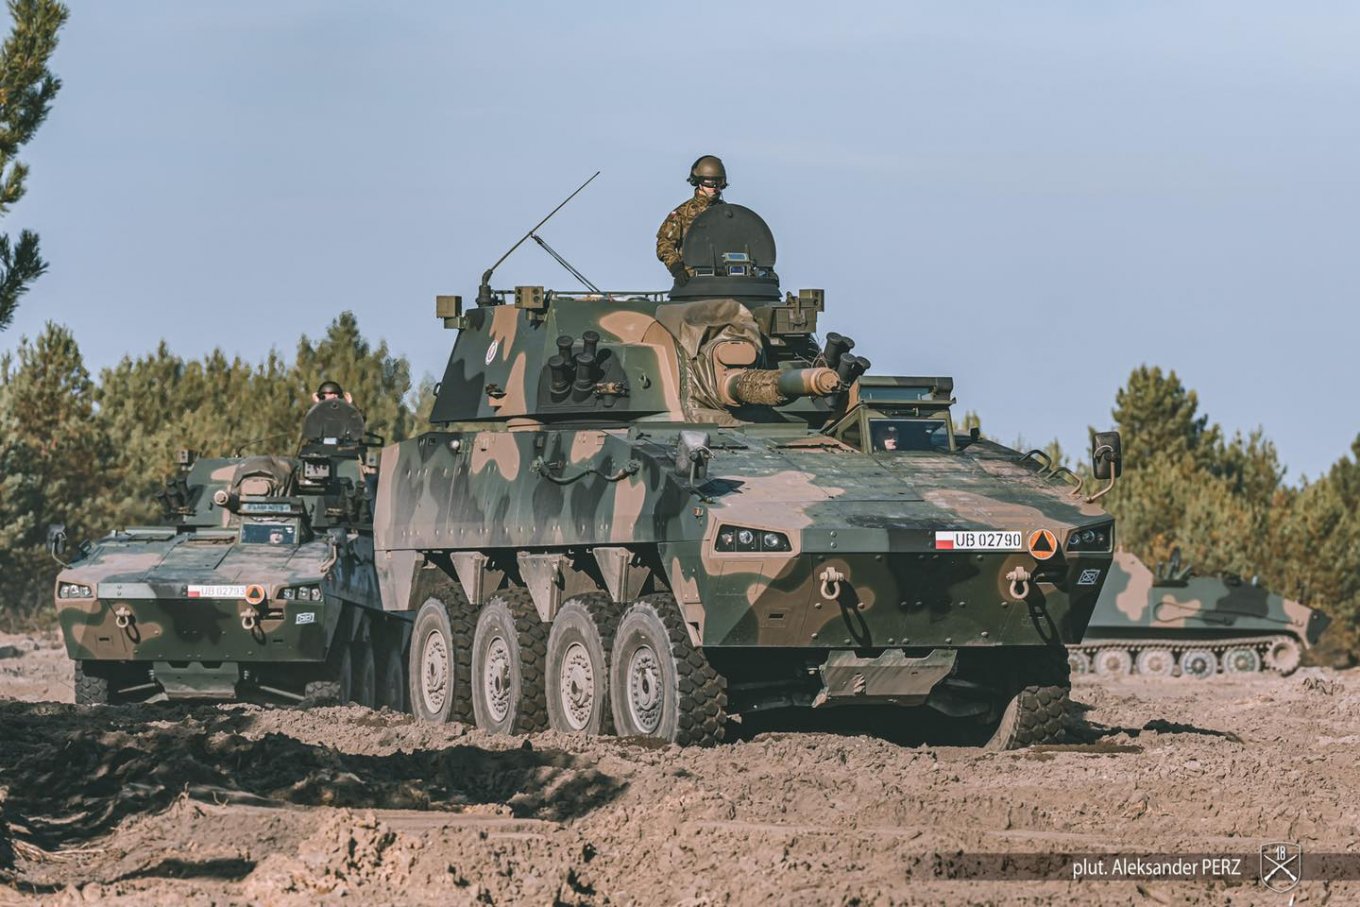 One of the episodes of the Puma-2022 maneuvers, Poland Preparing to Fight Against Russia with a help of Czech and British Tankmen,Defense Express